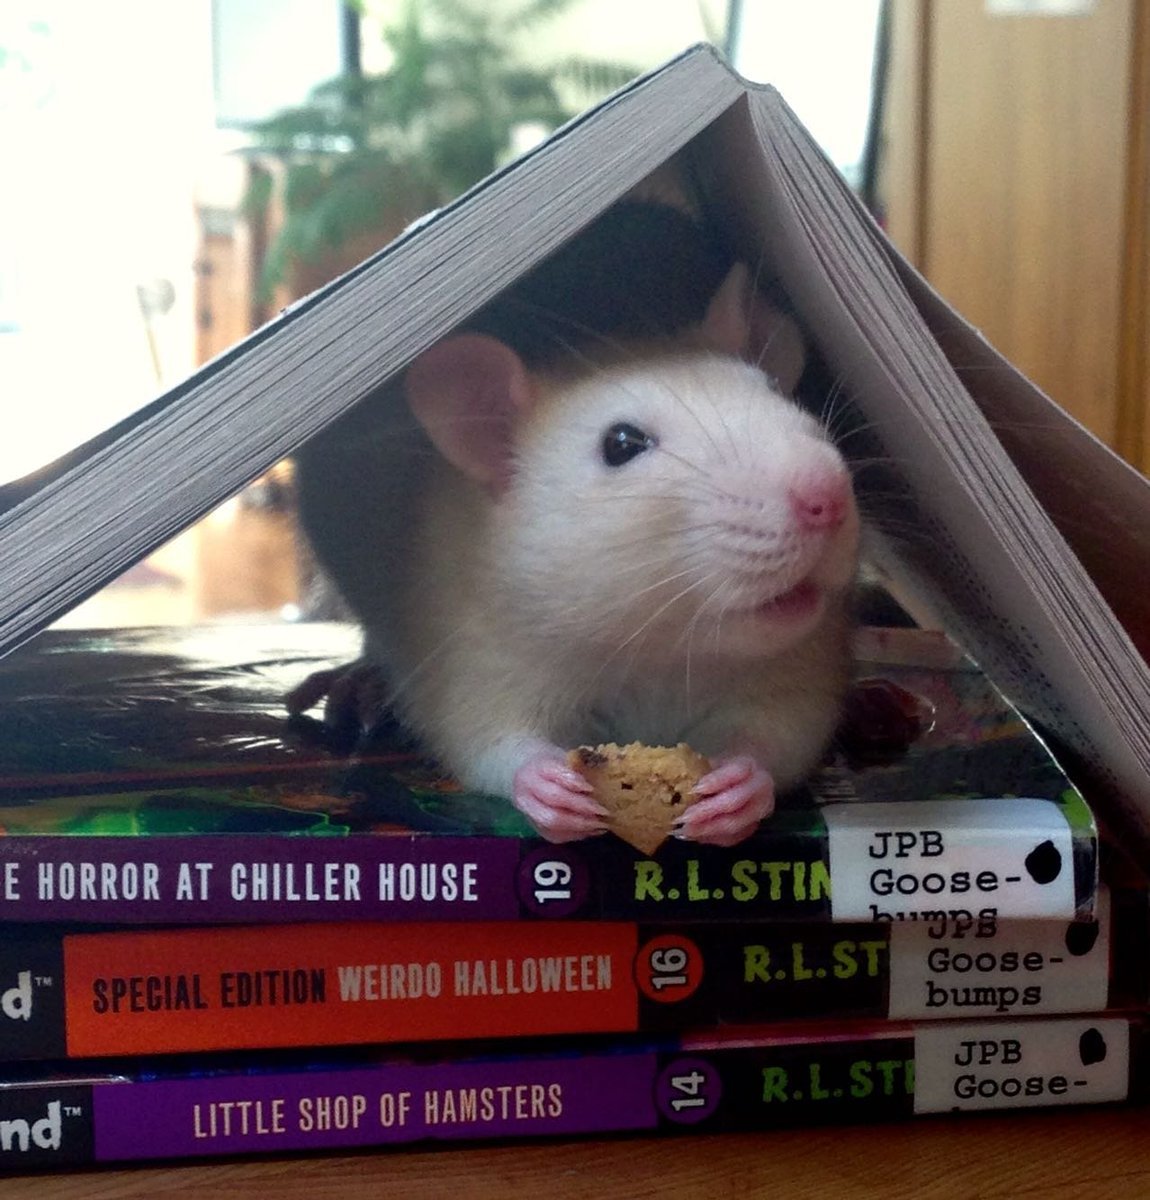 A rat eats a piece of cookie under a tented book